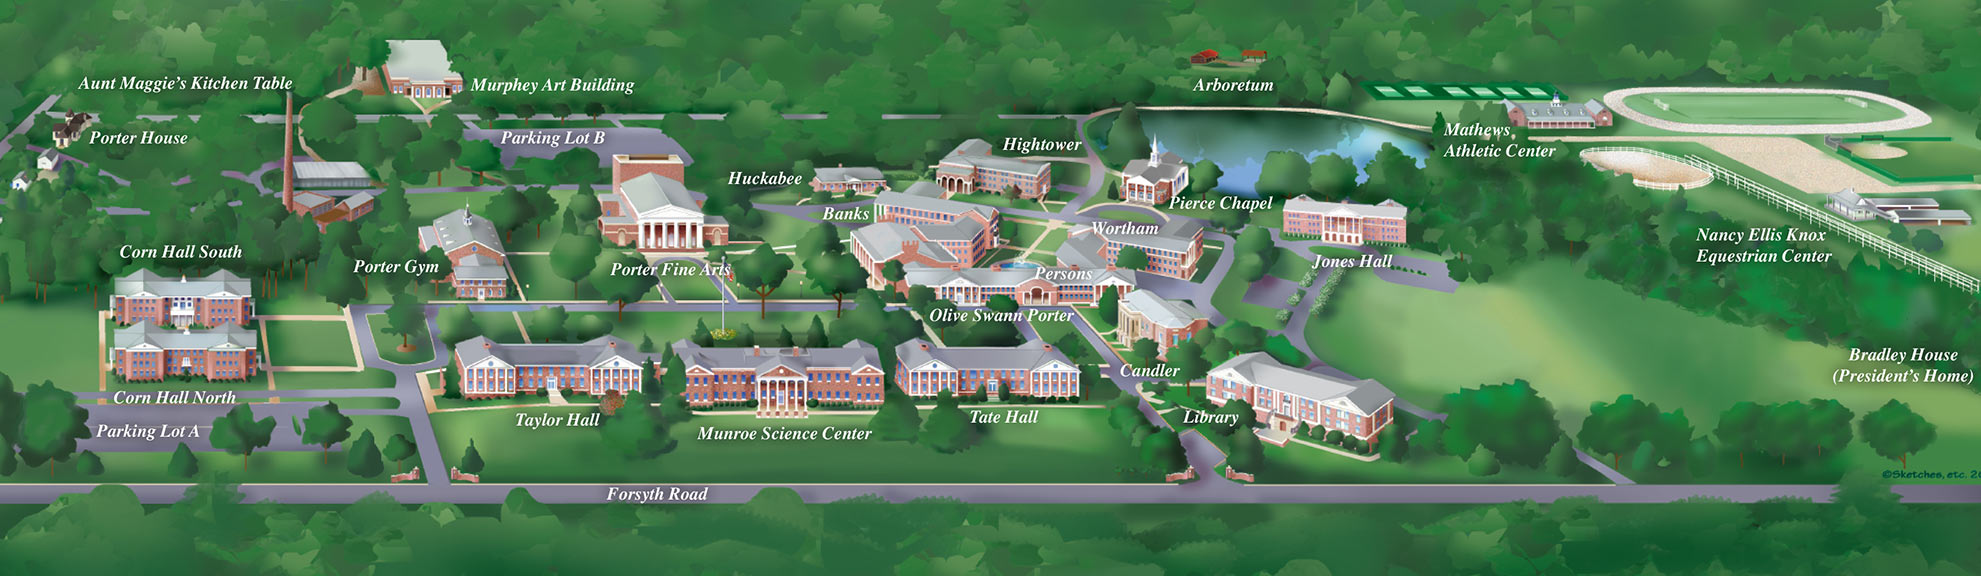 Image of Campus Map with titles of buildings.